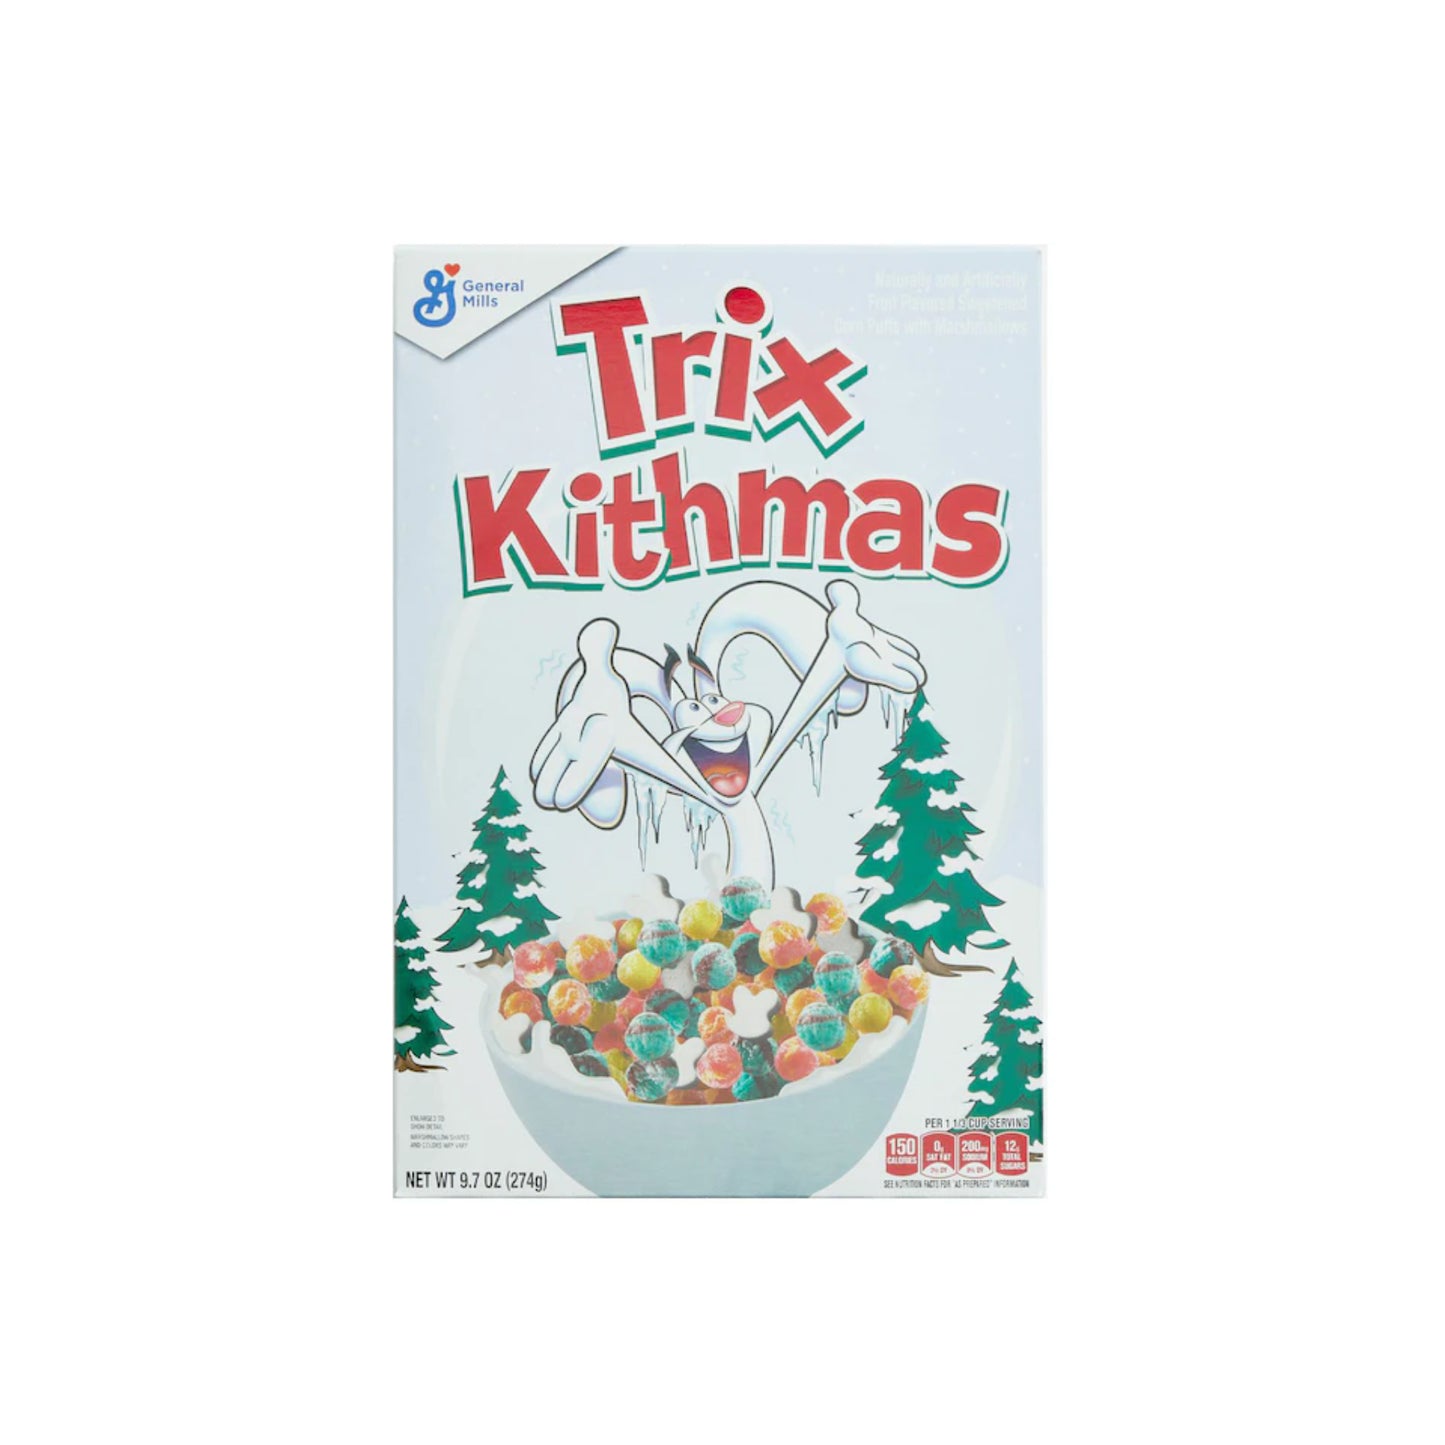 Kith for Trix Kithmas Cereal (Not Fit For Human Consumption)